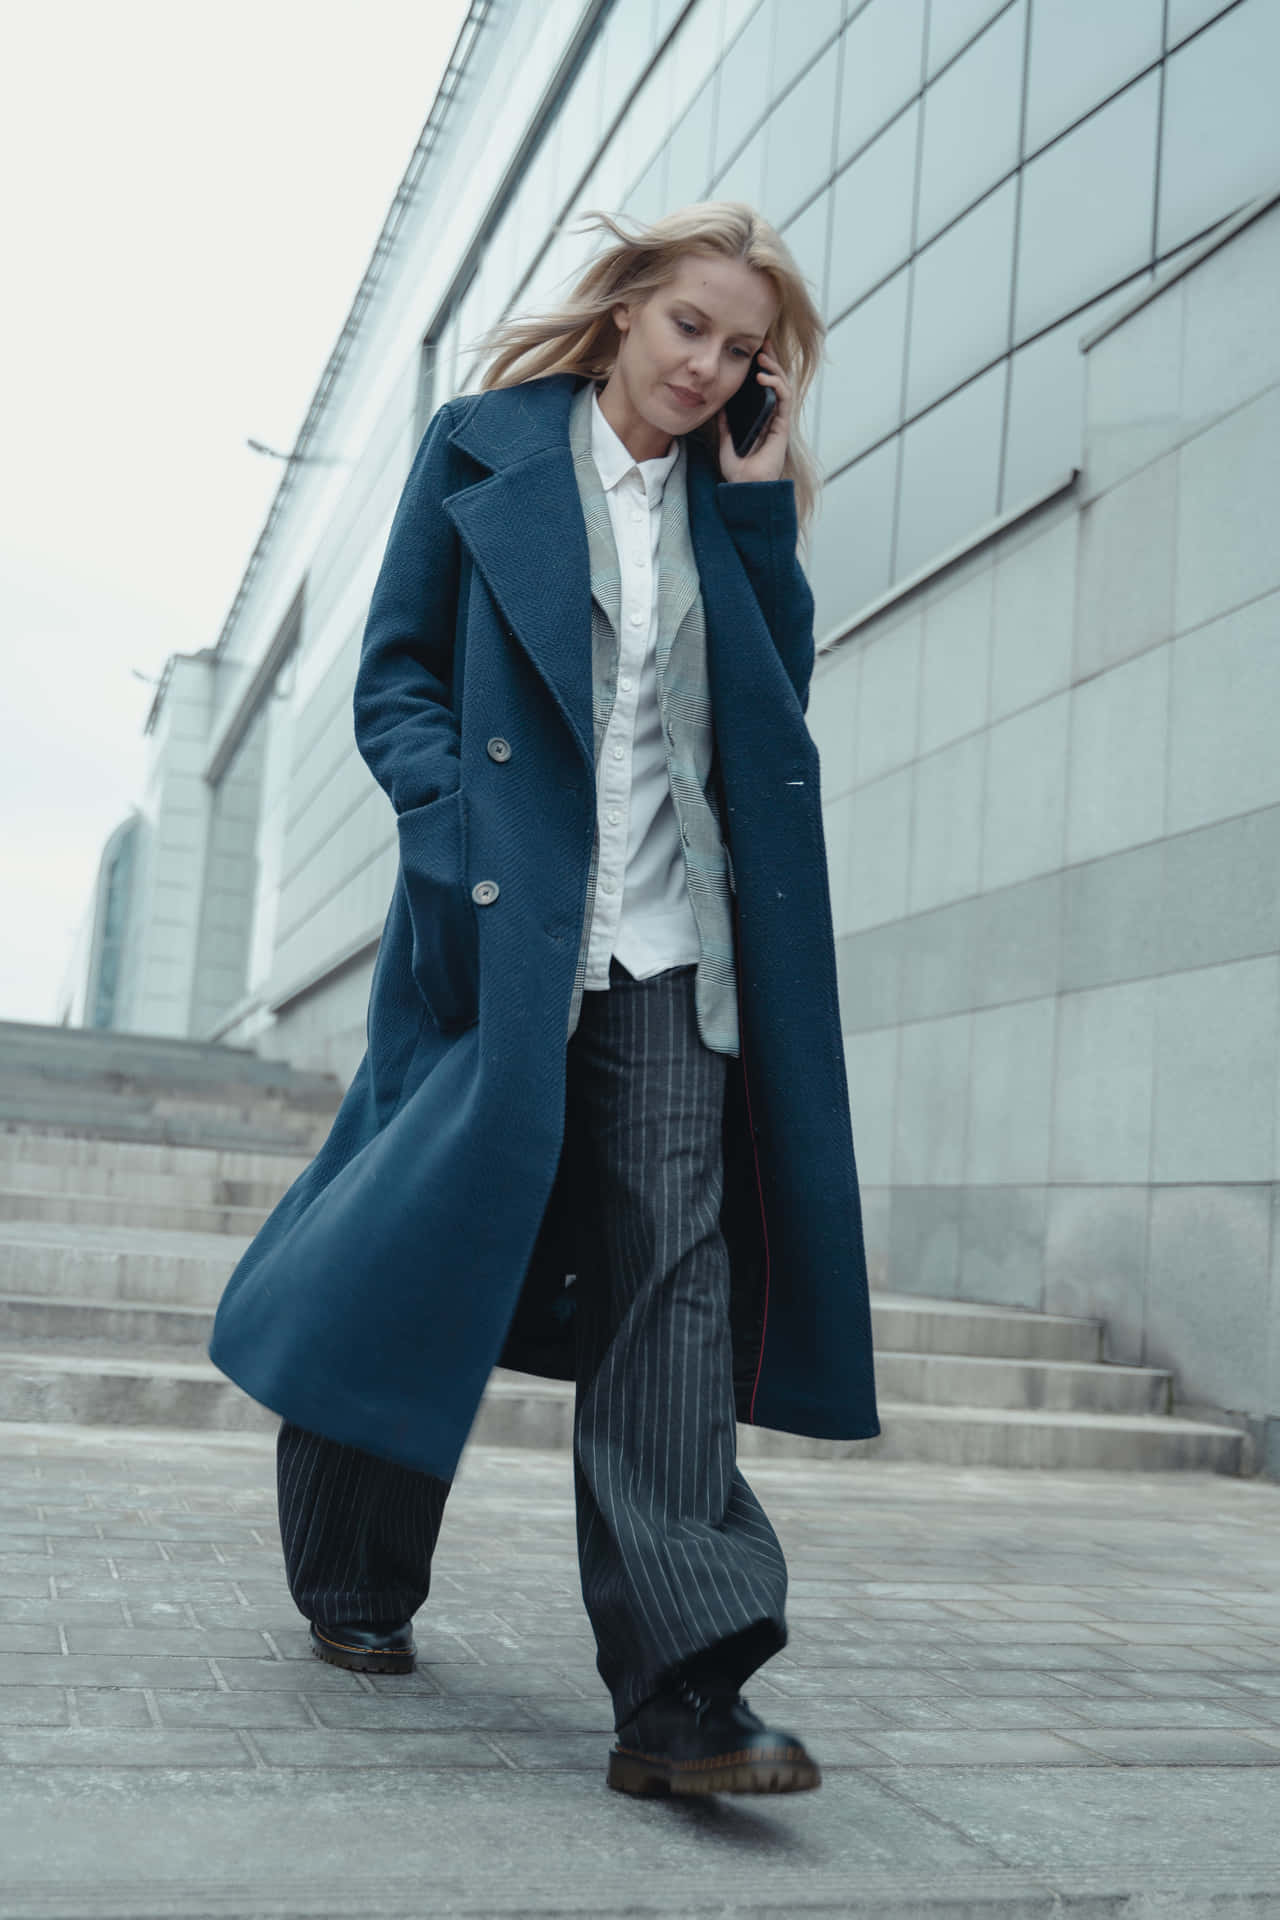 Stylish Navy Blue Peacoat For A Chic Winter Look Wallpaper